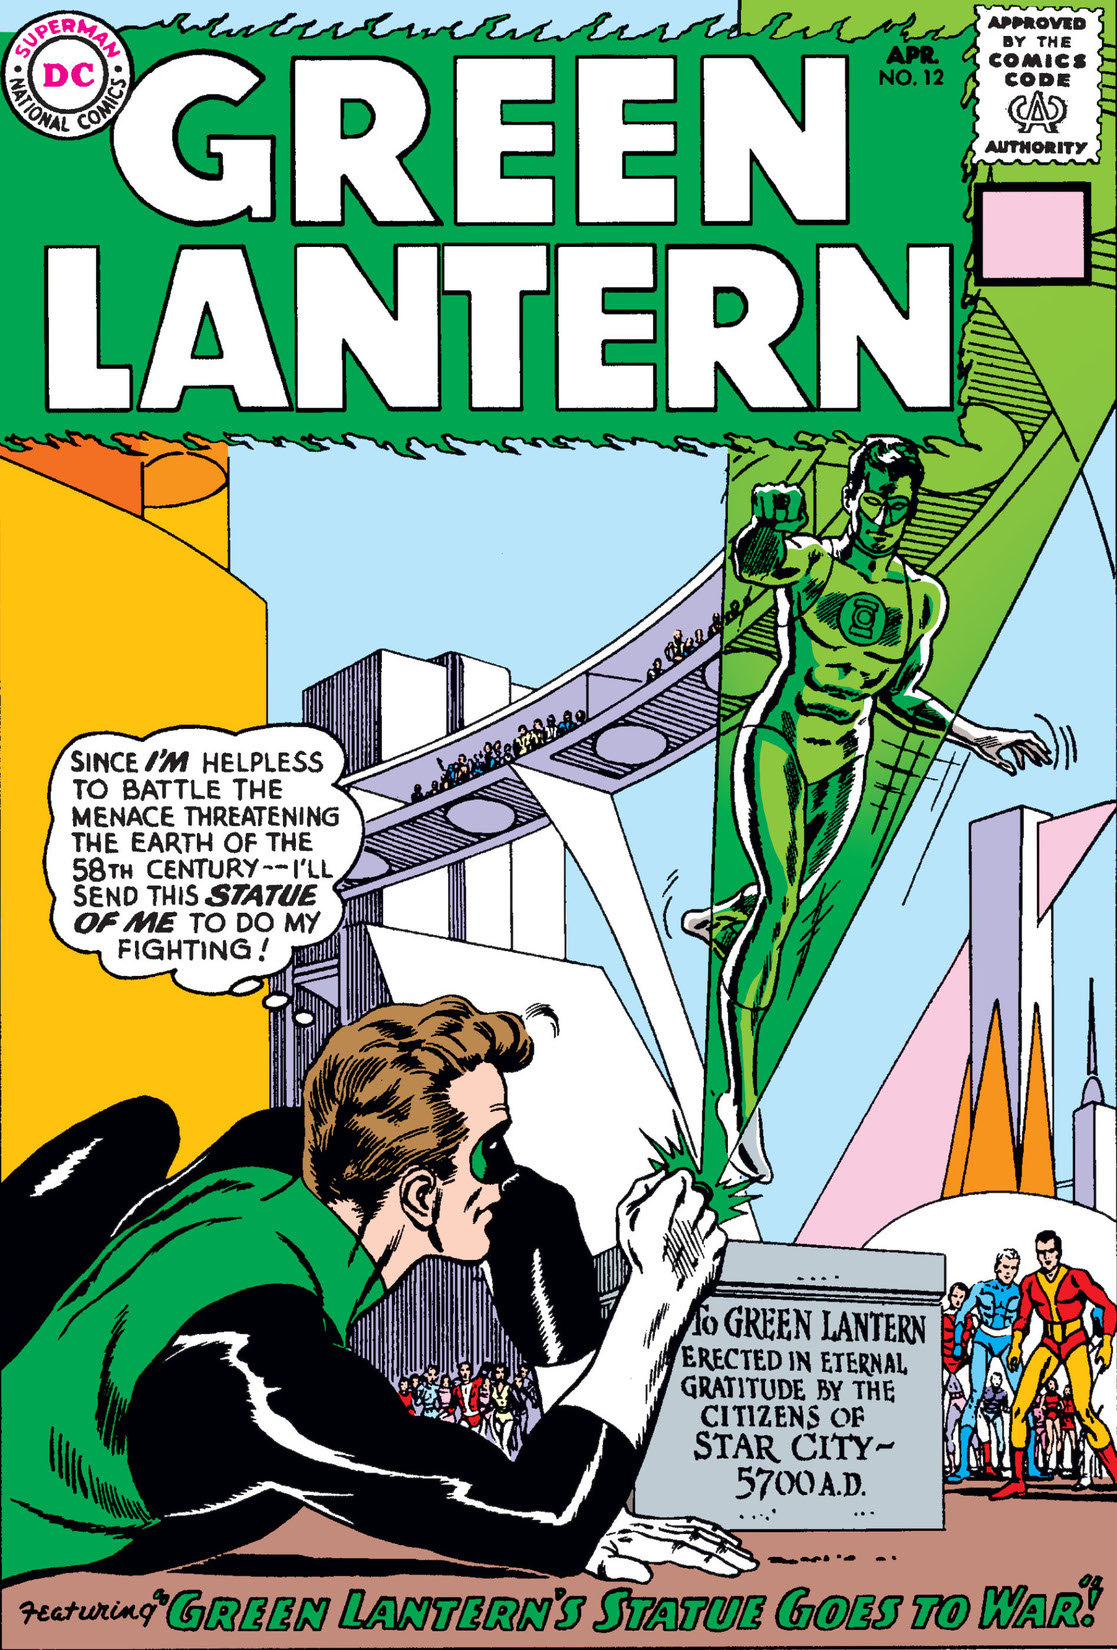 Green Lantern (1960-) #12 preview images